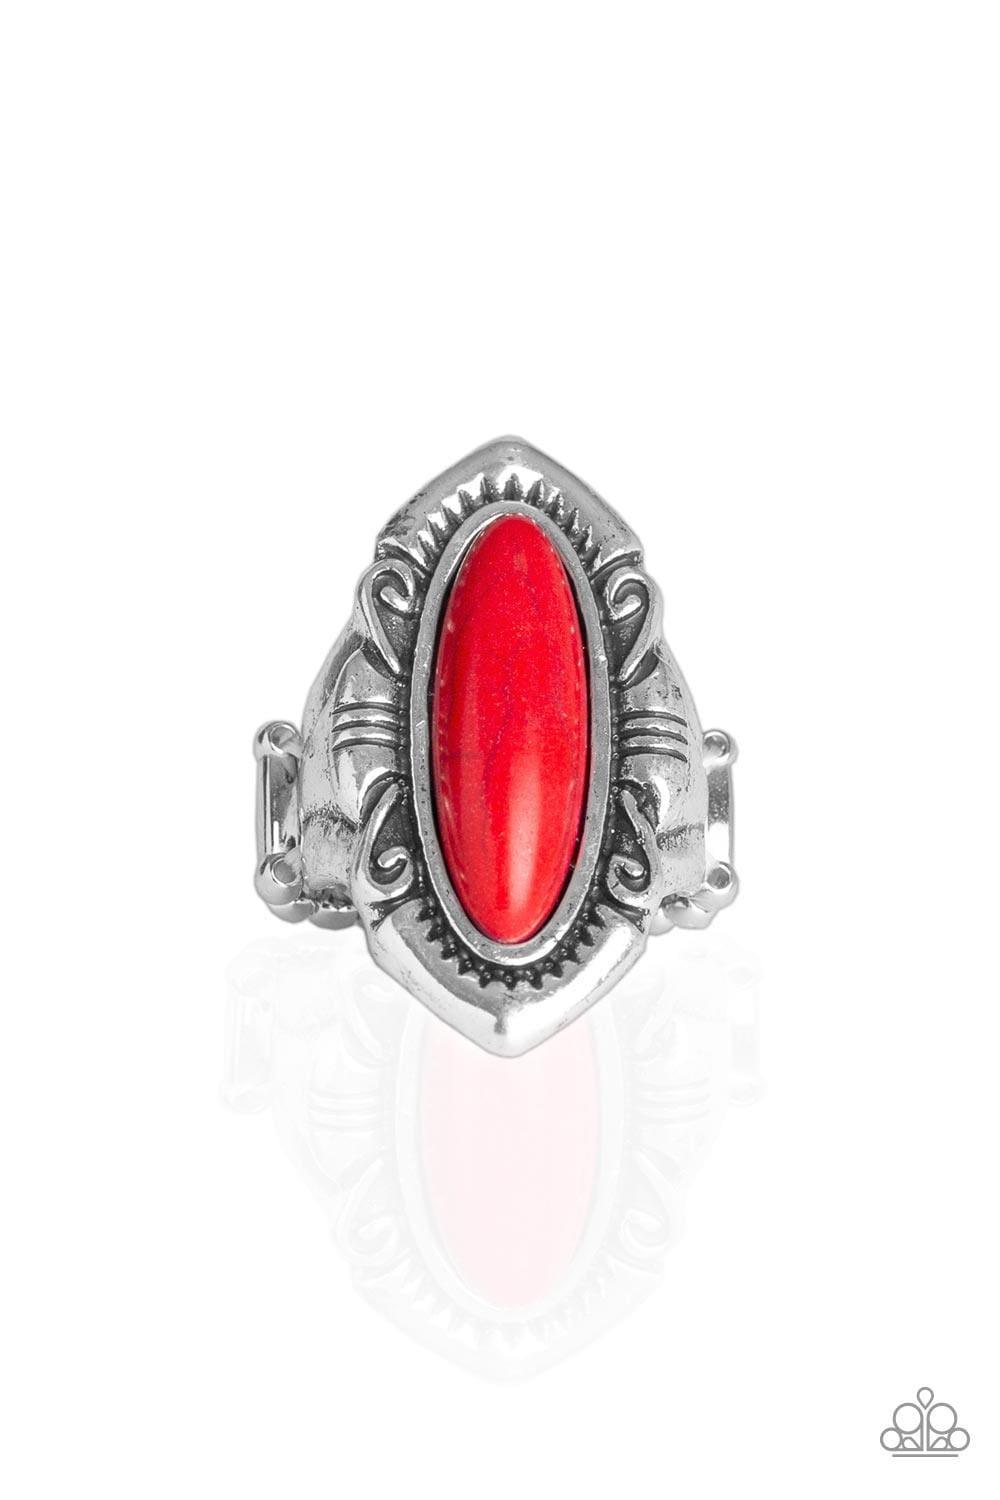 Paparazzi Accessories - Santa Fe Serenity - Red Ring - Bling by JessieK